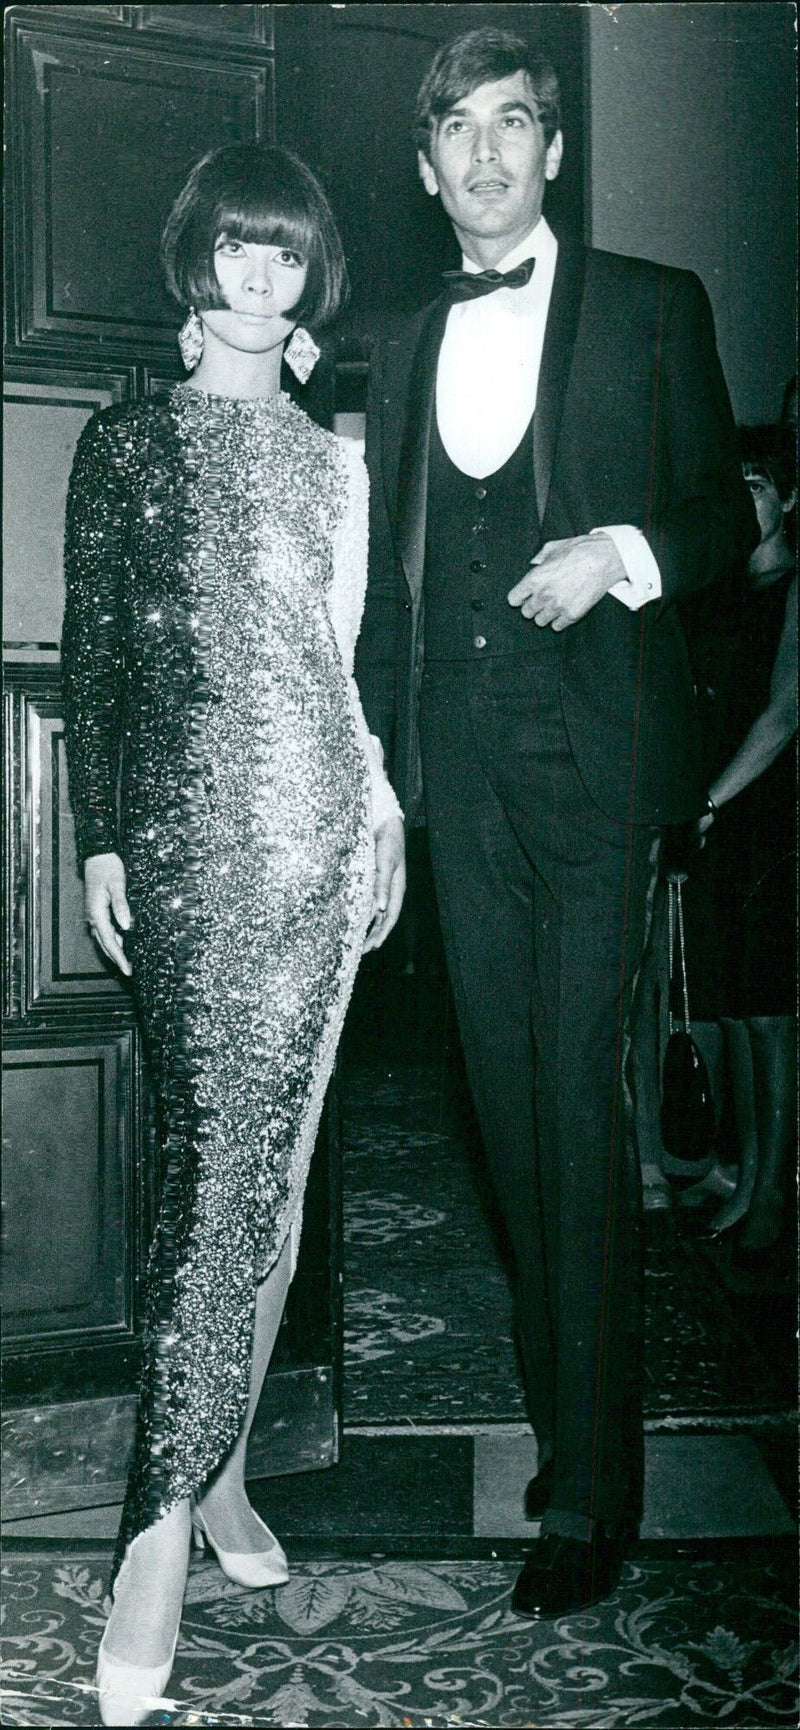 Pierre Cardin with star model Hiroko, 1965 - Vintage Photograph